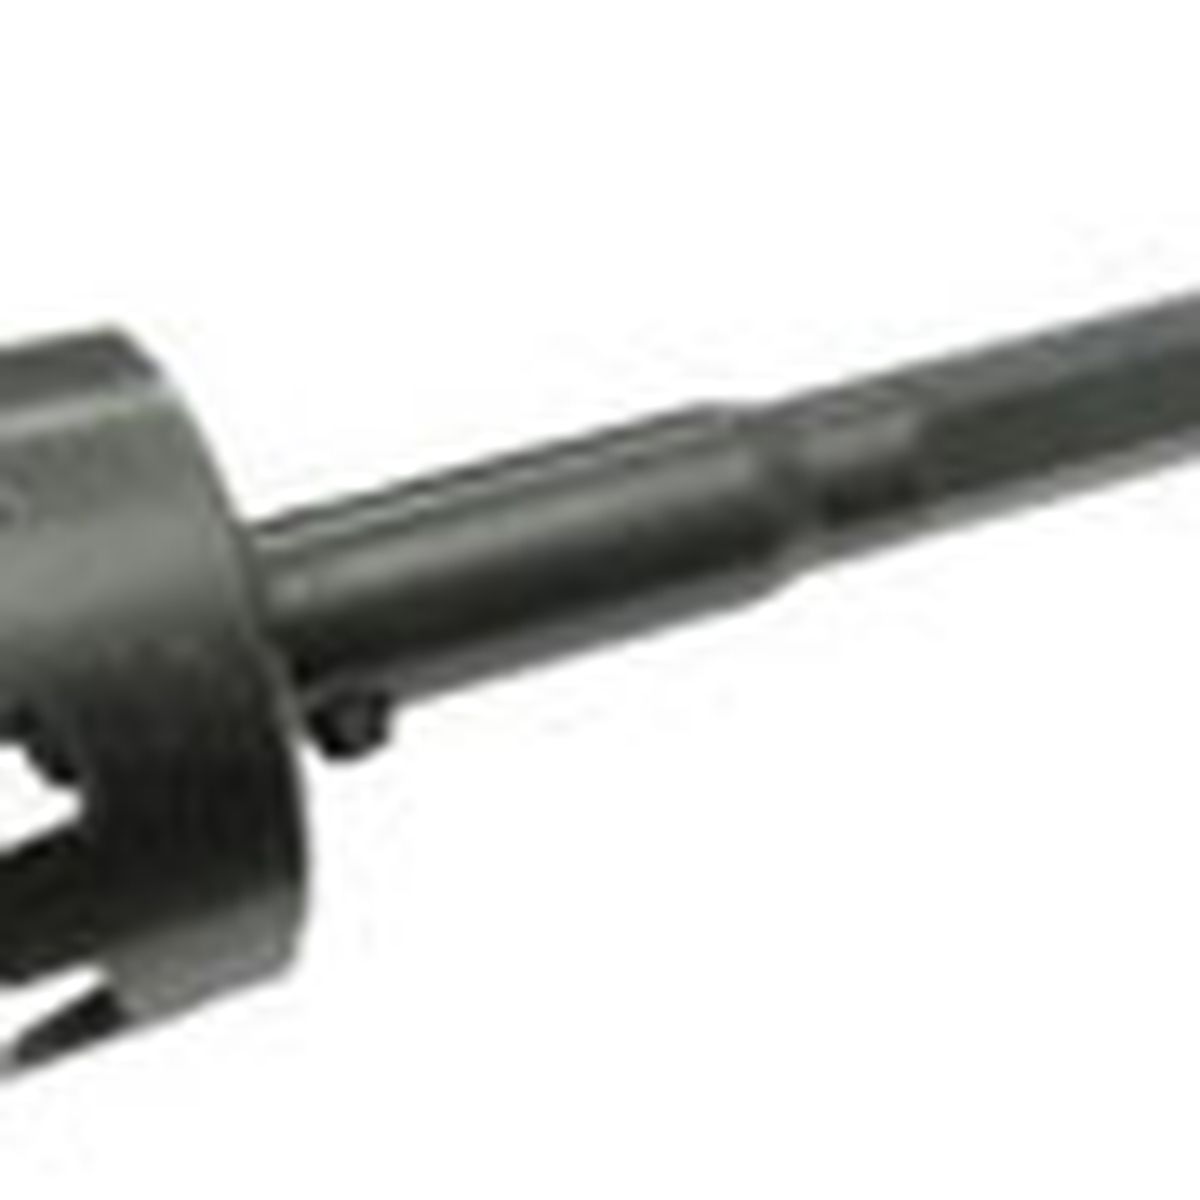 1 and 3/8-inch wood-boring bit